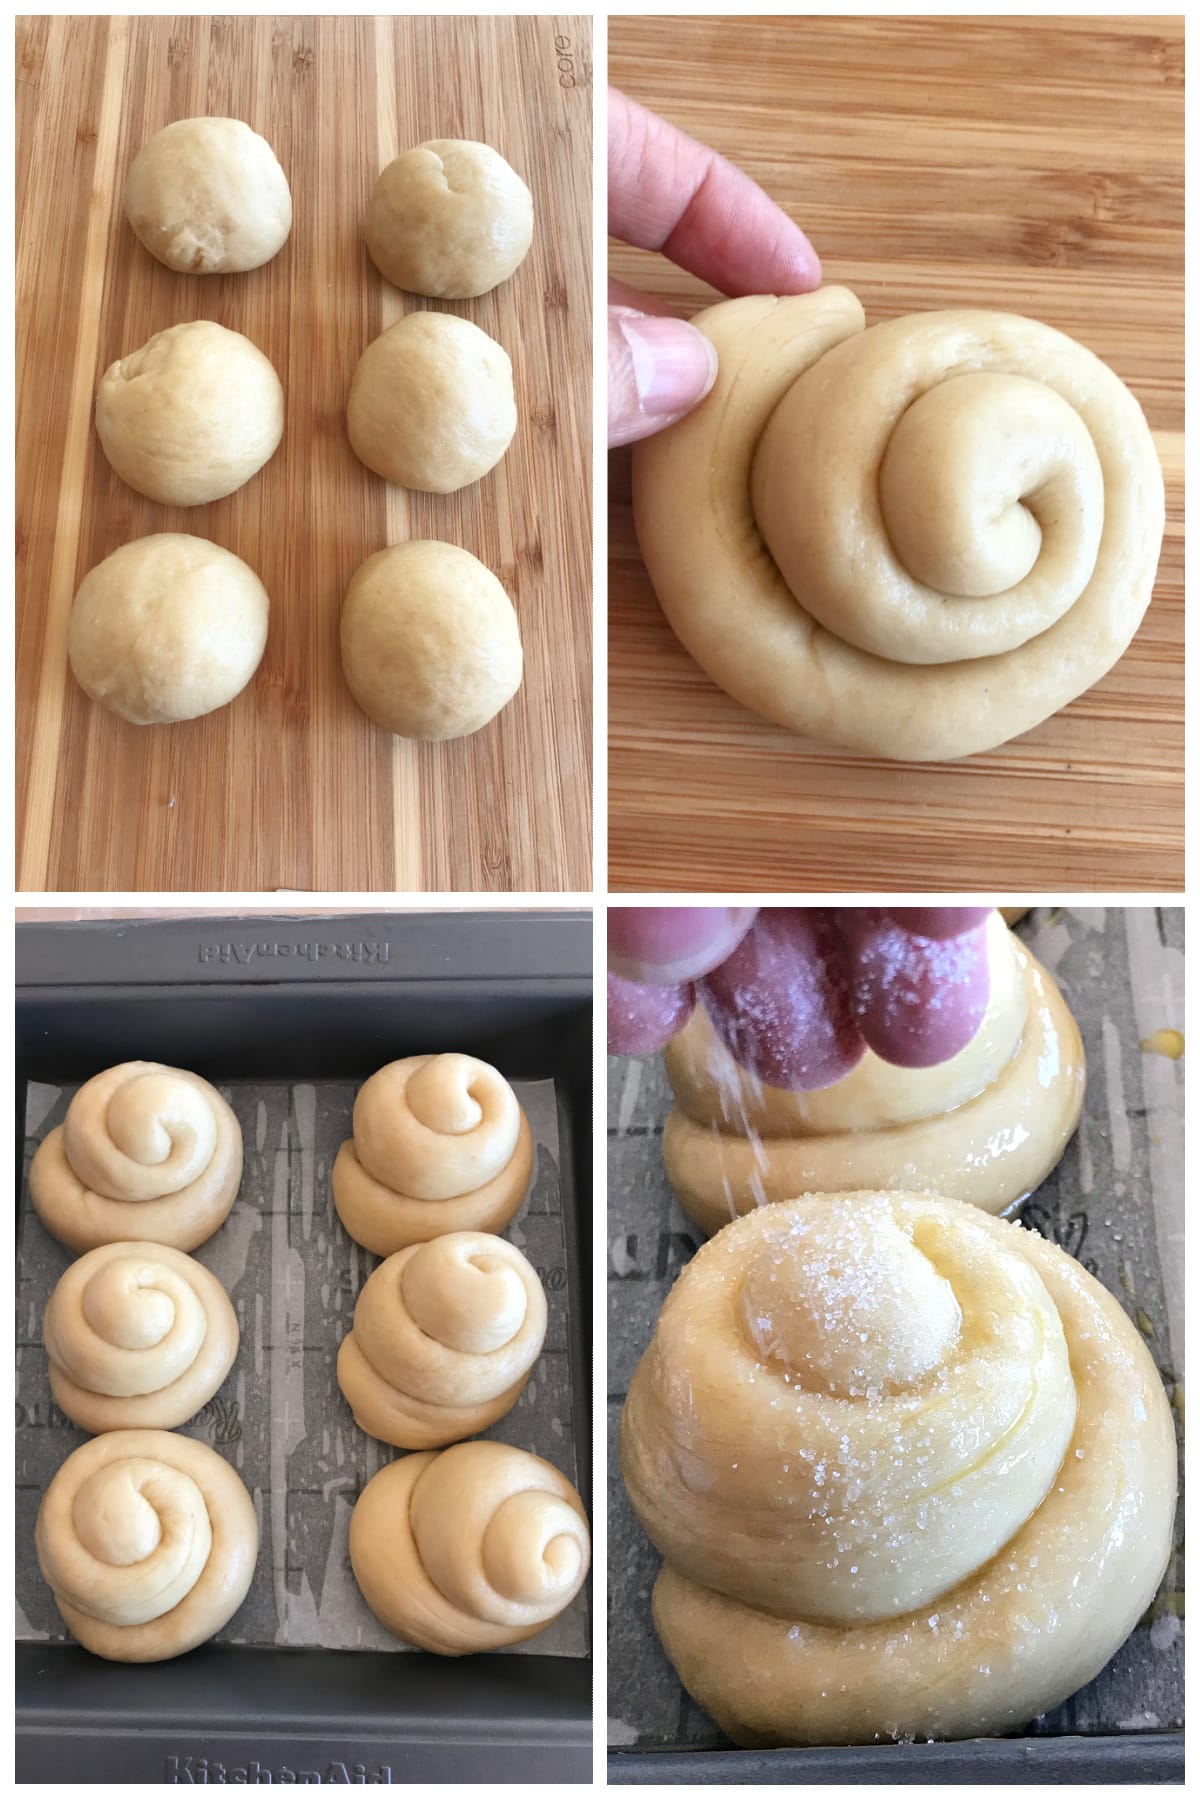 A collage of four images showing how to shape and bake bread rolls.